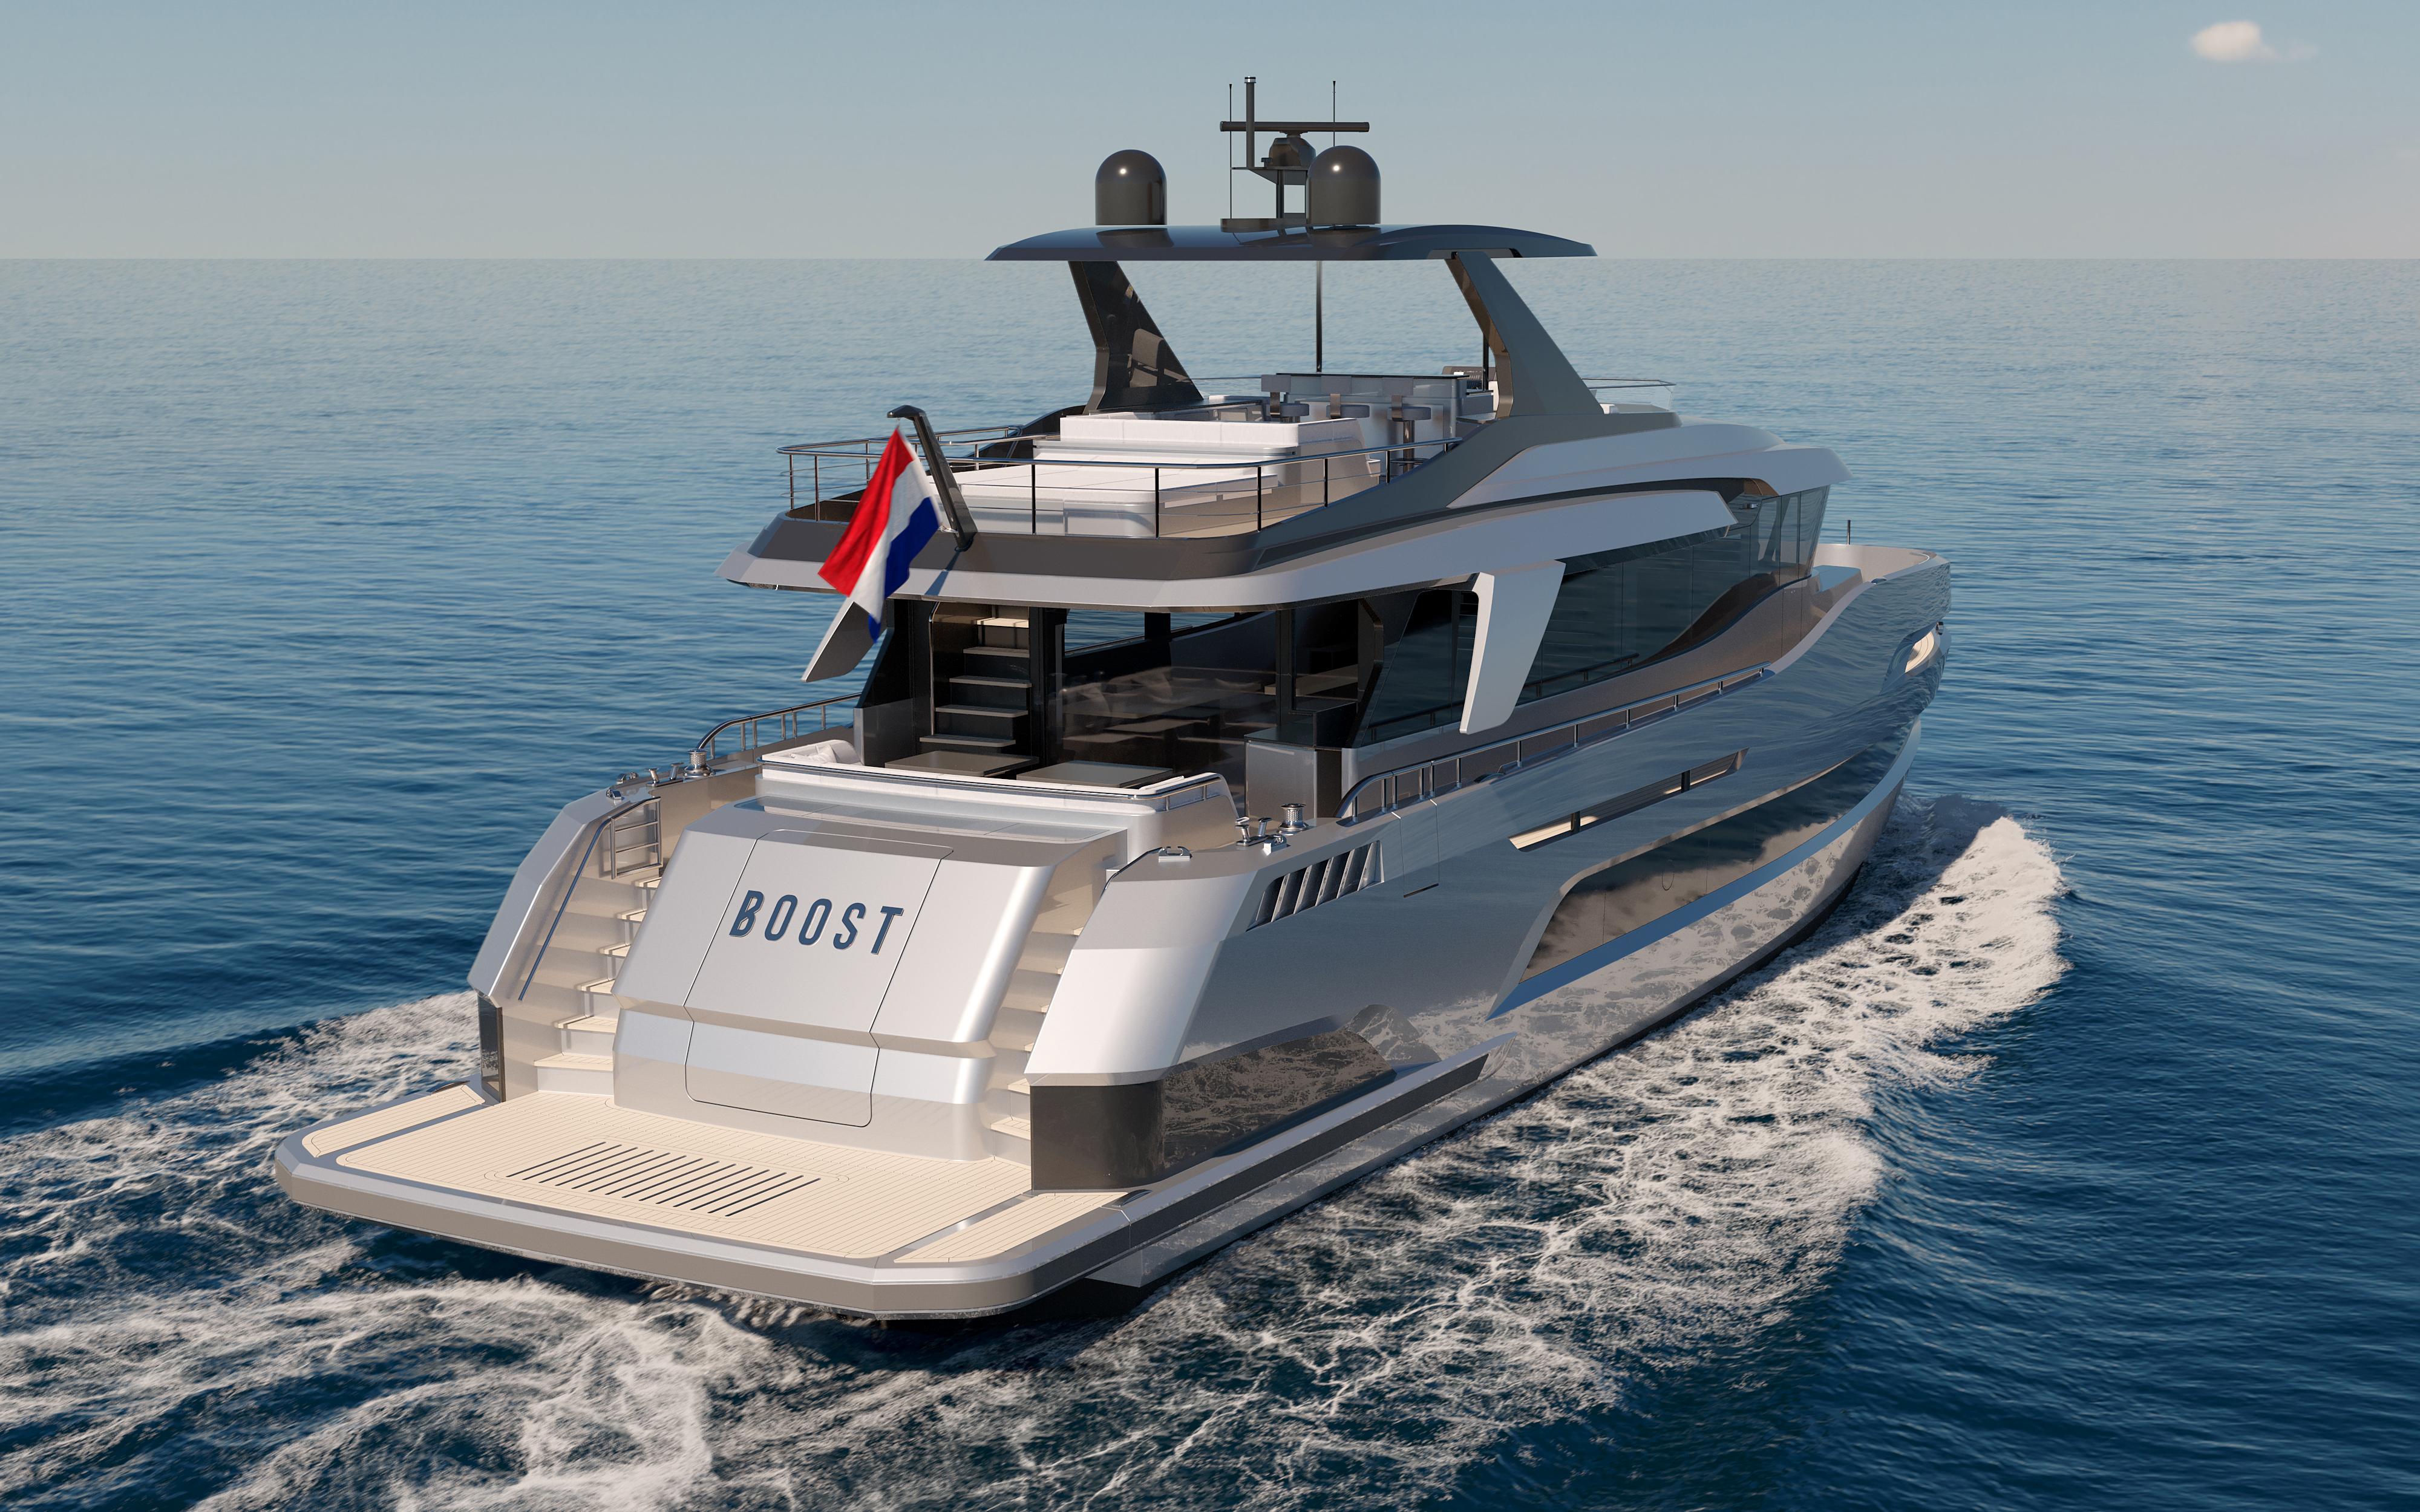 Miramar: A first look onboard the first 24m Holterman X-treme 78 Sport yacht